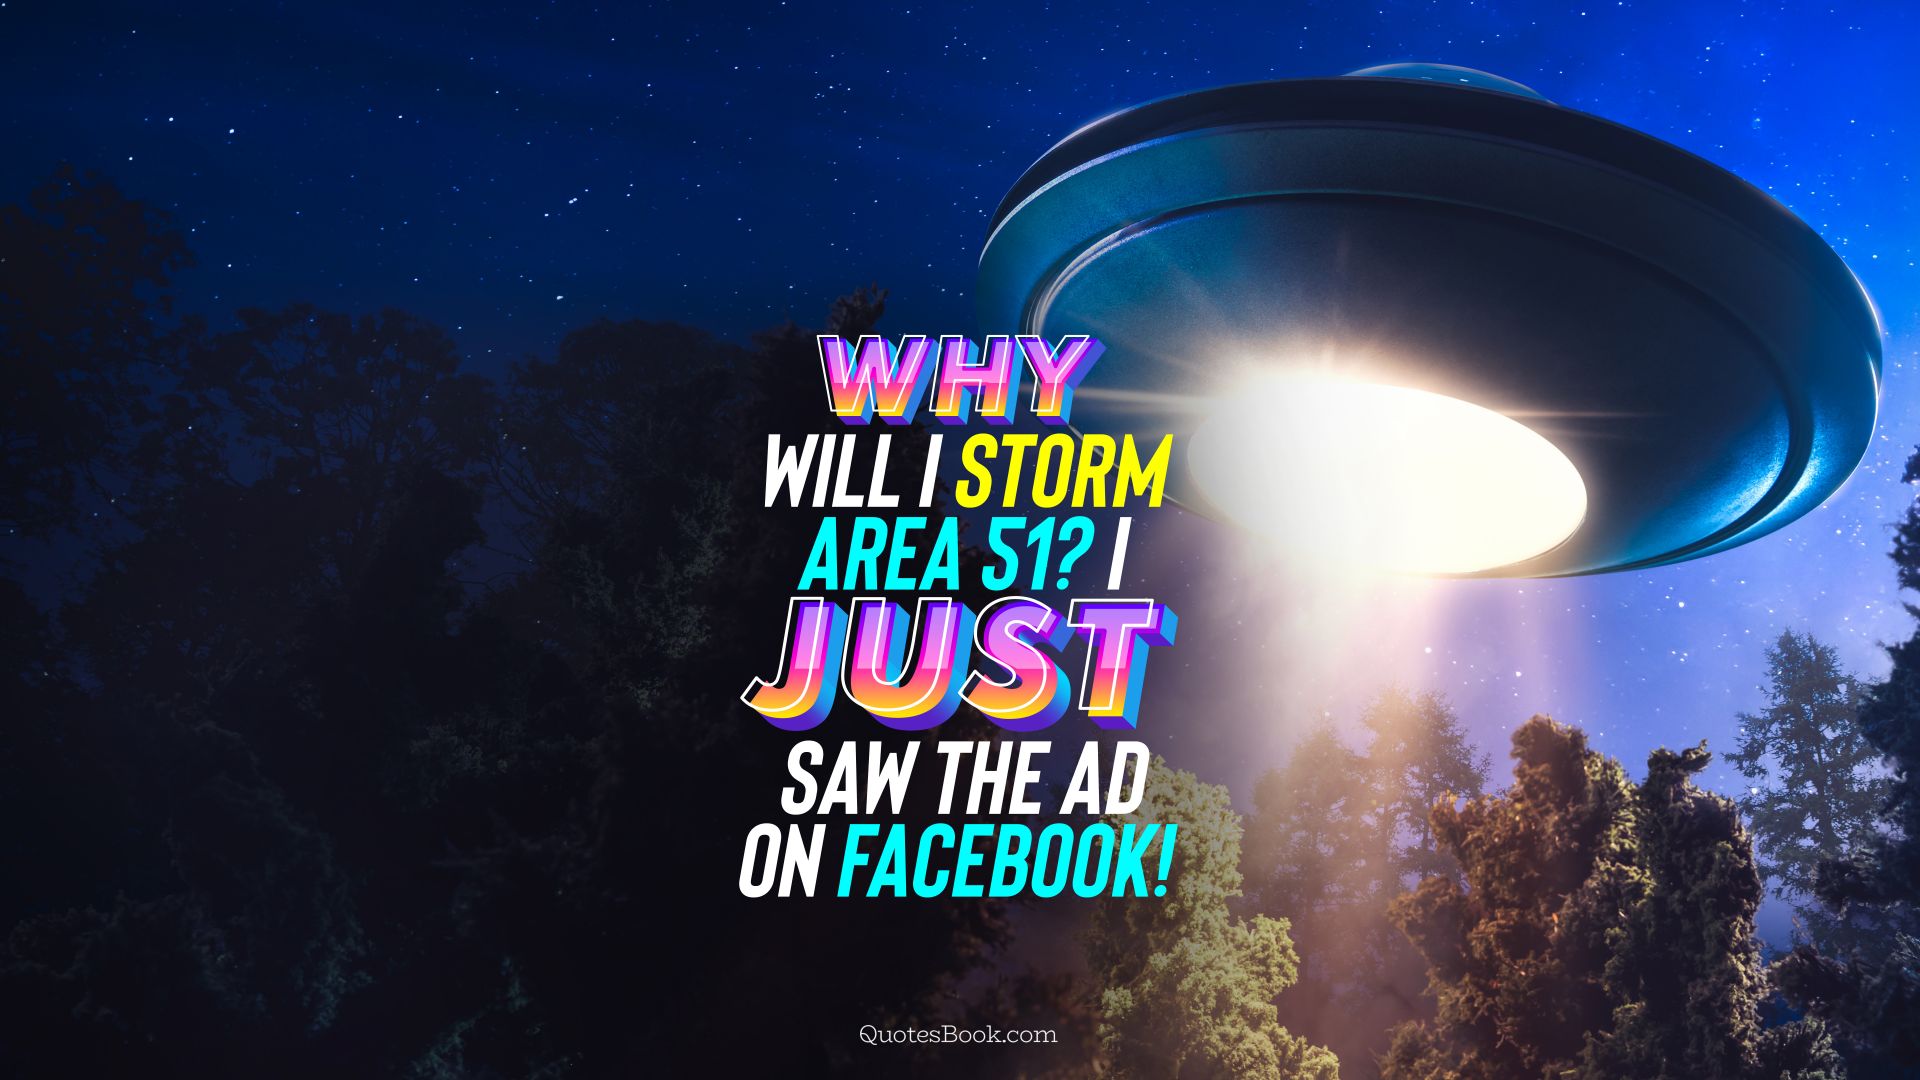 Why will I storm Area 51? I just saw the ad on Facebook!